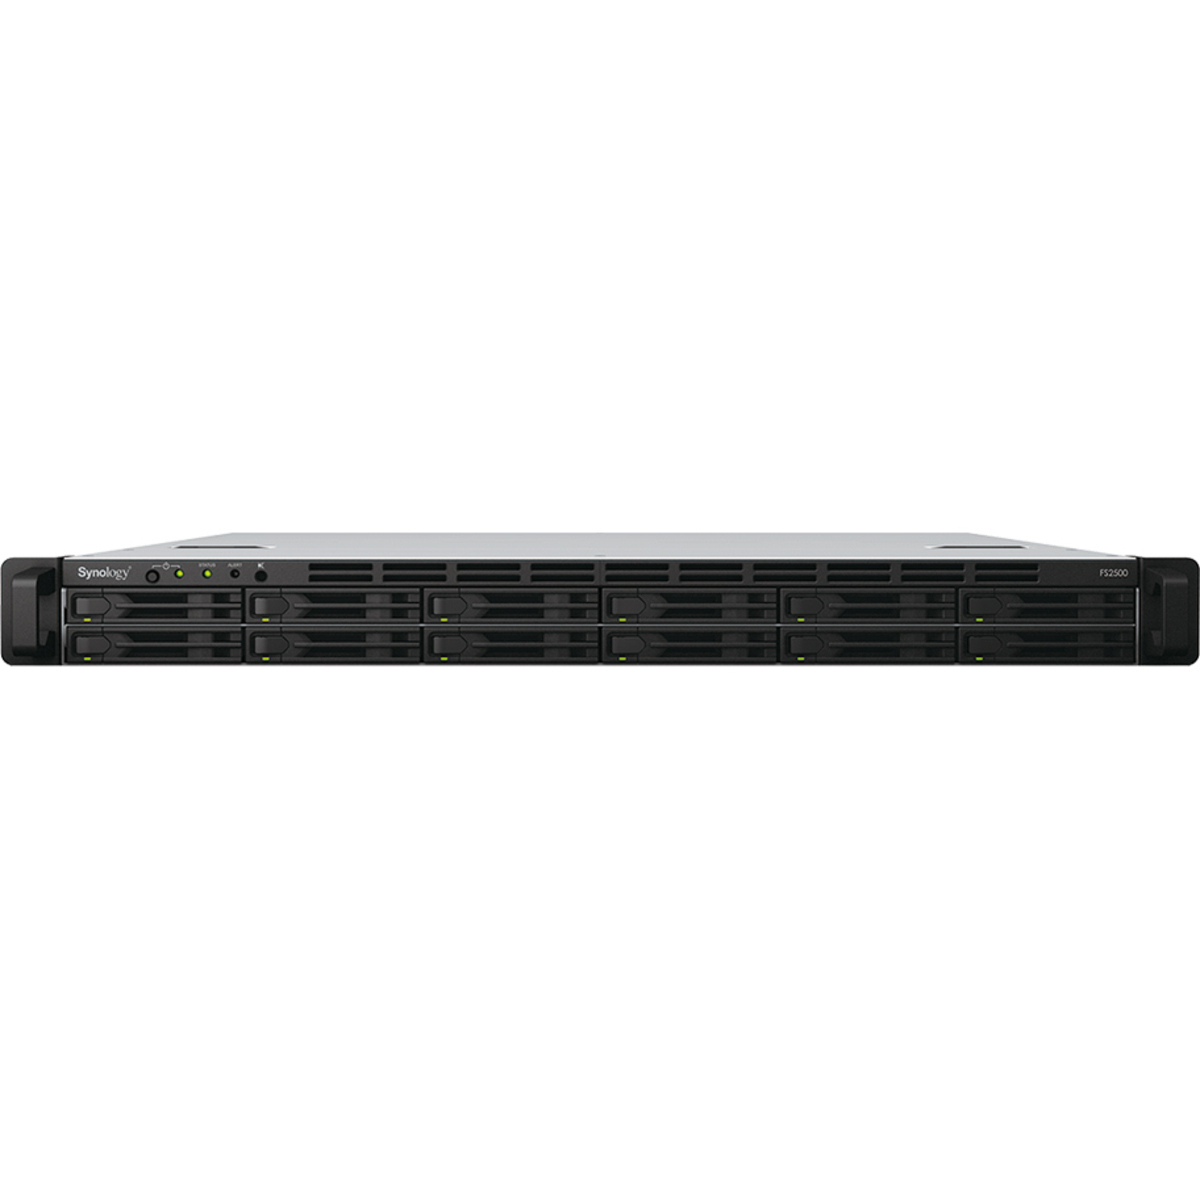 Synology FlashStation FS2500 16tb 12-Bay RackMount Large Business / Enterprise NAS - Network Attached Storage Device 8x2tb Sandisk Ultra 3D SDSSDH3-2T00 2.5 560/520MB/s SATA 6Gb/s SSD CONSUMER Class Drives Installed - Burn-In Tested - FREE RAM UPGRADE FlashStation FS2500